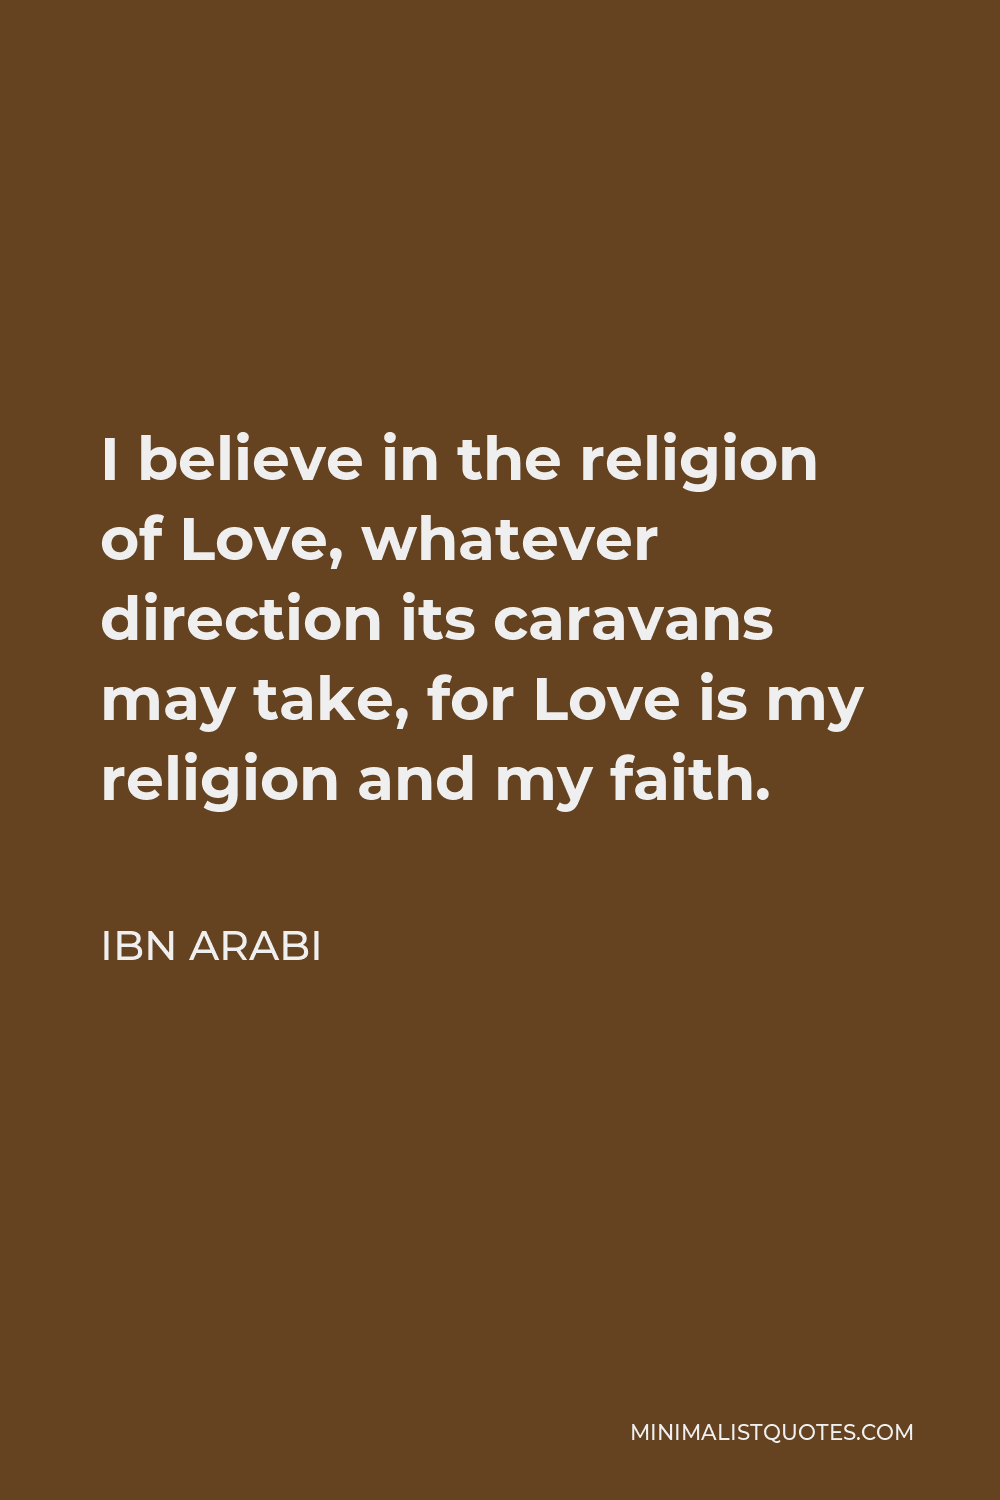 Ibn Arabi Quote - I believe in the religion of Love, whatever direction its caravans may take, for Love is my religion and my faith.